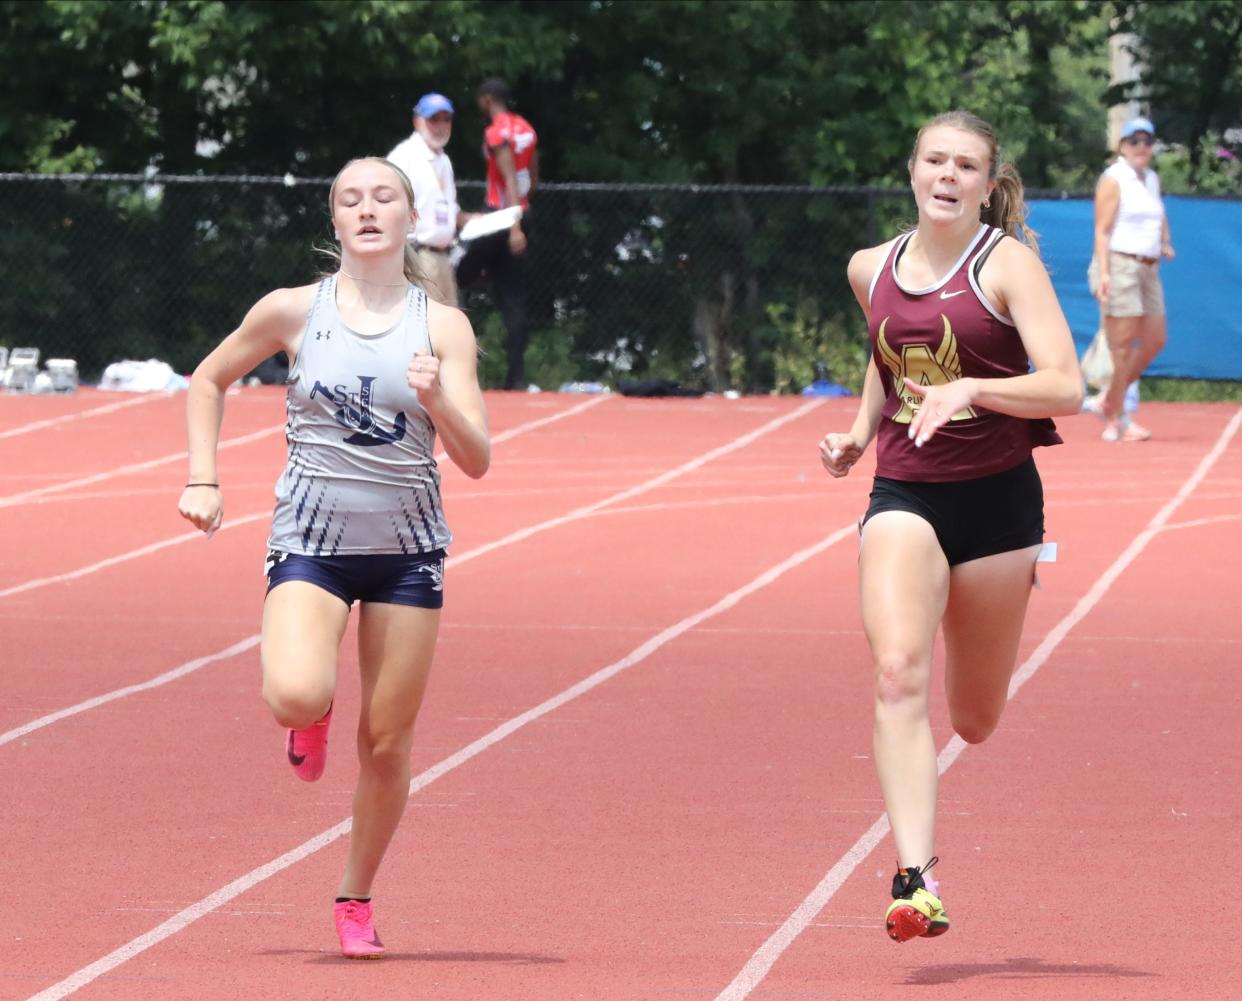 Riley Pettigrew from Arlington, second from right, competes in the girls 200 meter dash division 1, during the New York State Track and Field Championships at Middletown High School, June 10, 2023.